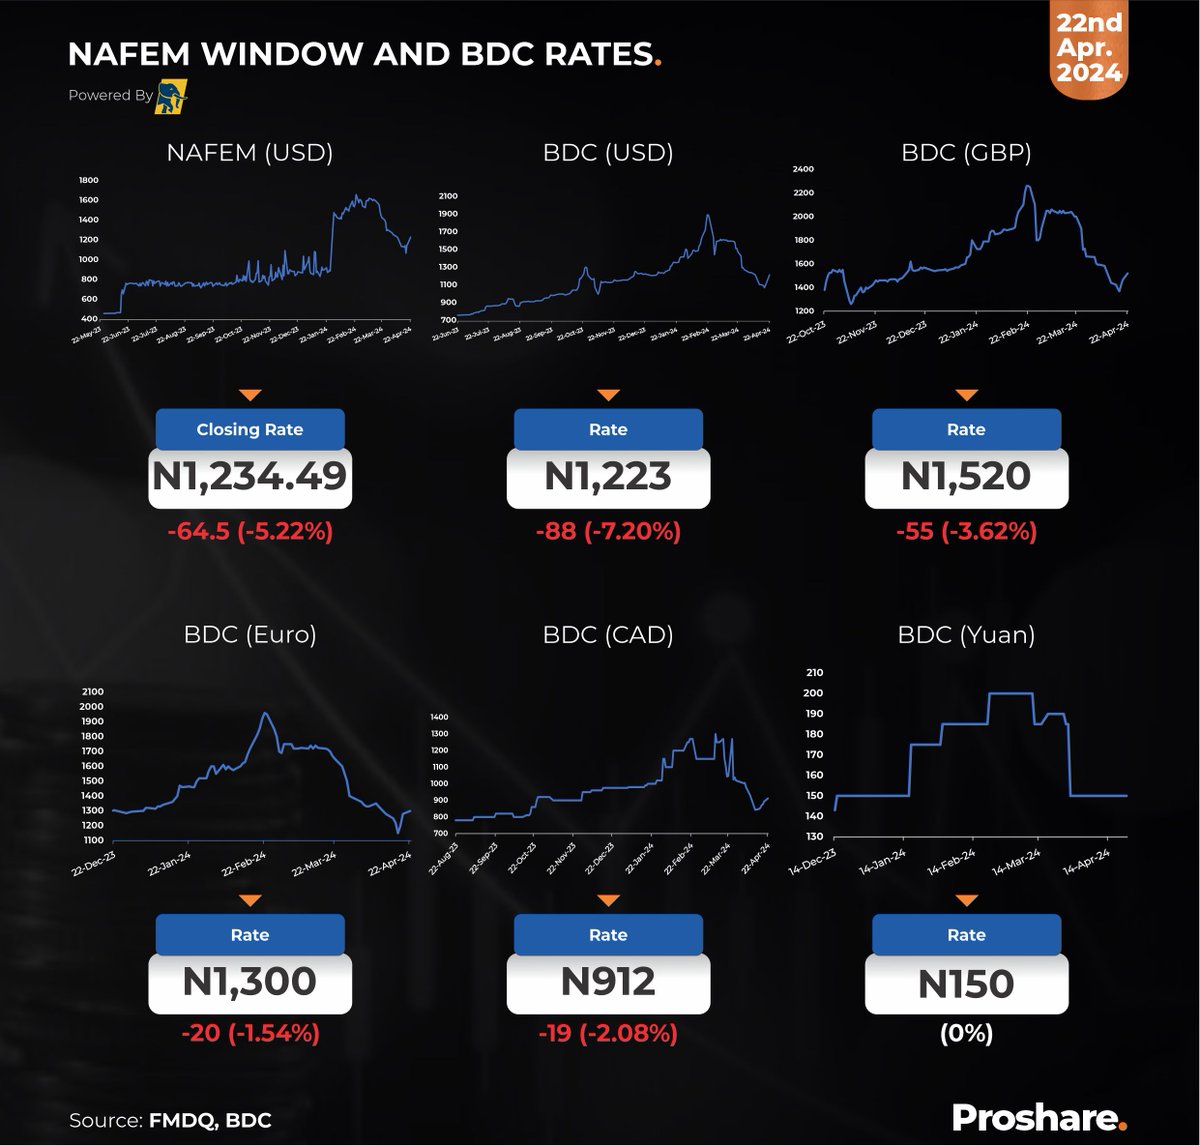 NAFEM Window and BDC (USD, GBP, CAD, EURO & YUAN) Rates – April 22, 2024
 
Closing Rate - N1,234.49

BDC Rate - N1,223 

GBP Rate - N1,520

EURO Rate - N1,300 

CAD Rate - N912

YUAN Rate - N150

Compare more currencies via proshare.co/exchangerates

#AskProshare
#ExchangeRates